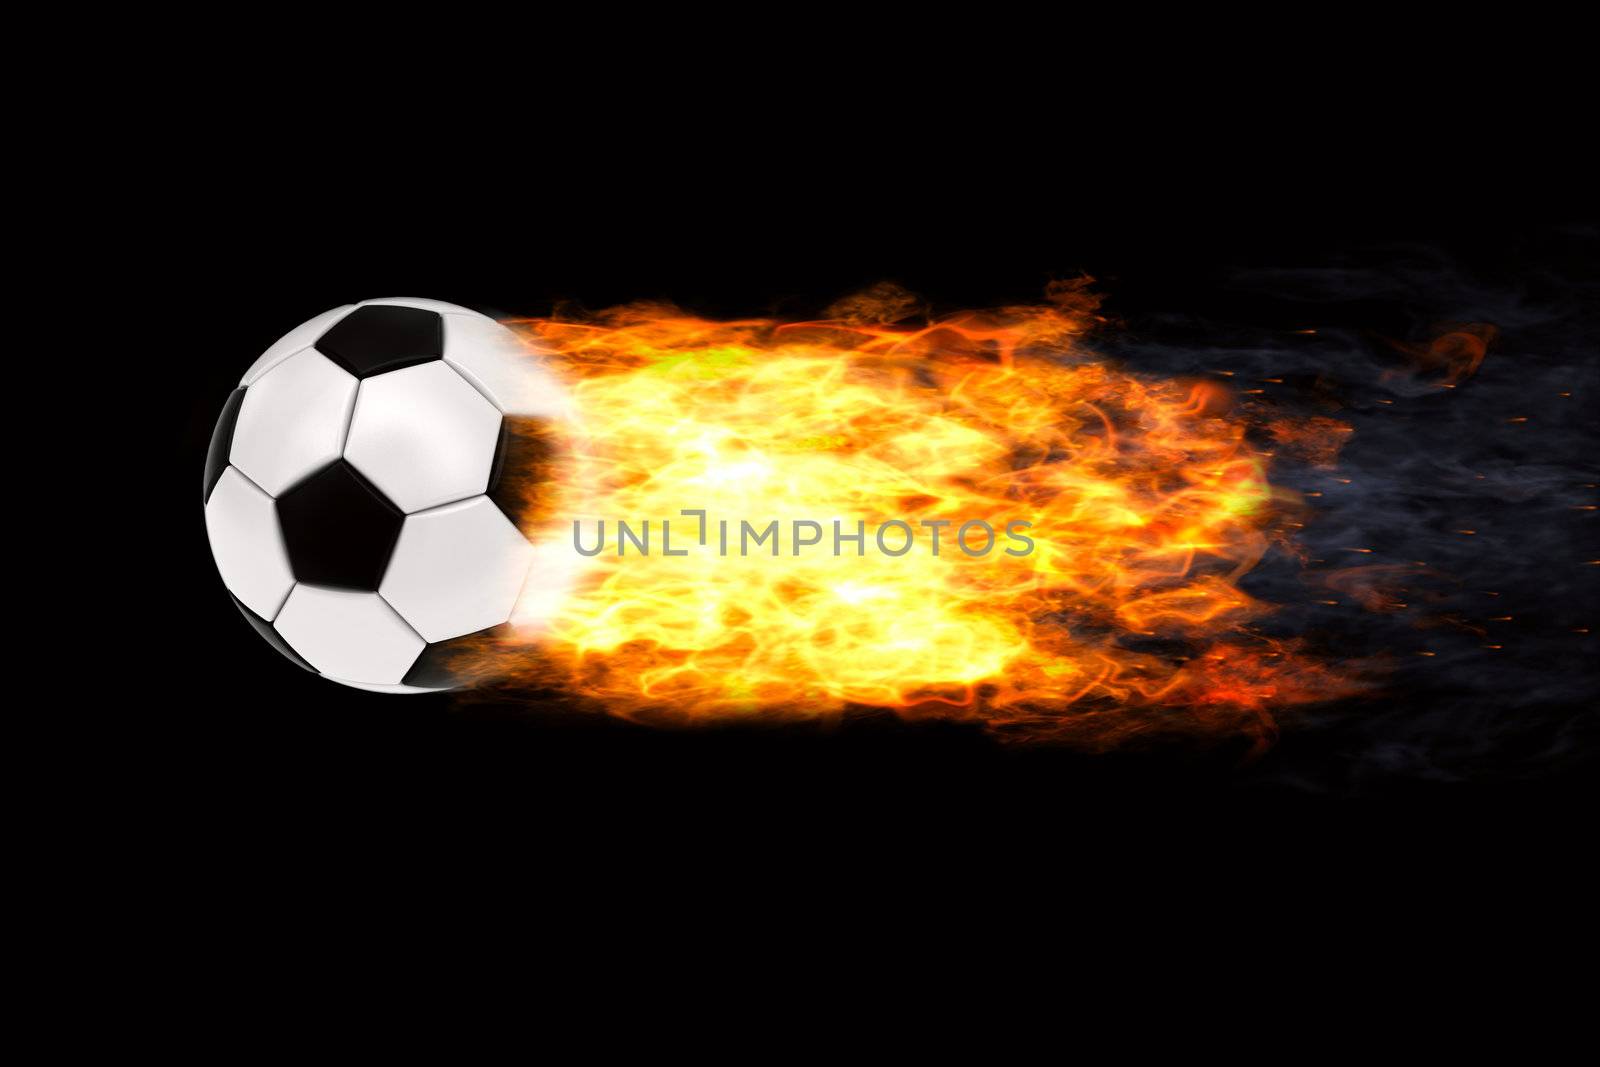 Soccer ball in flames on black background. High resolution 3D image